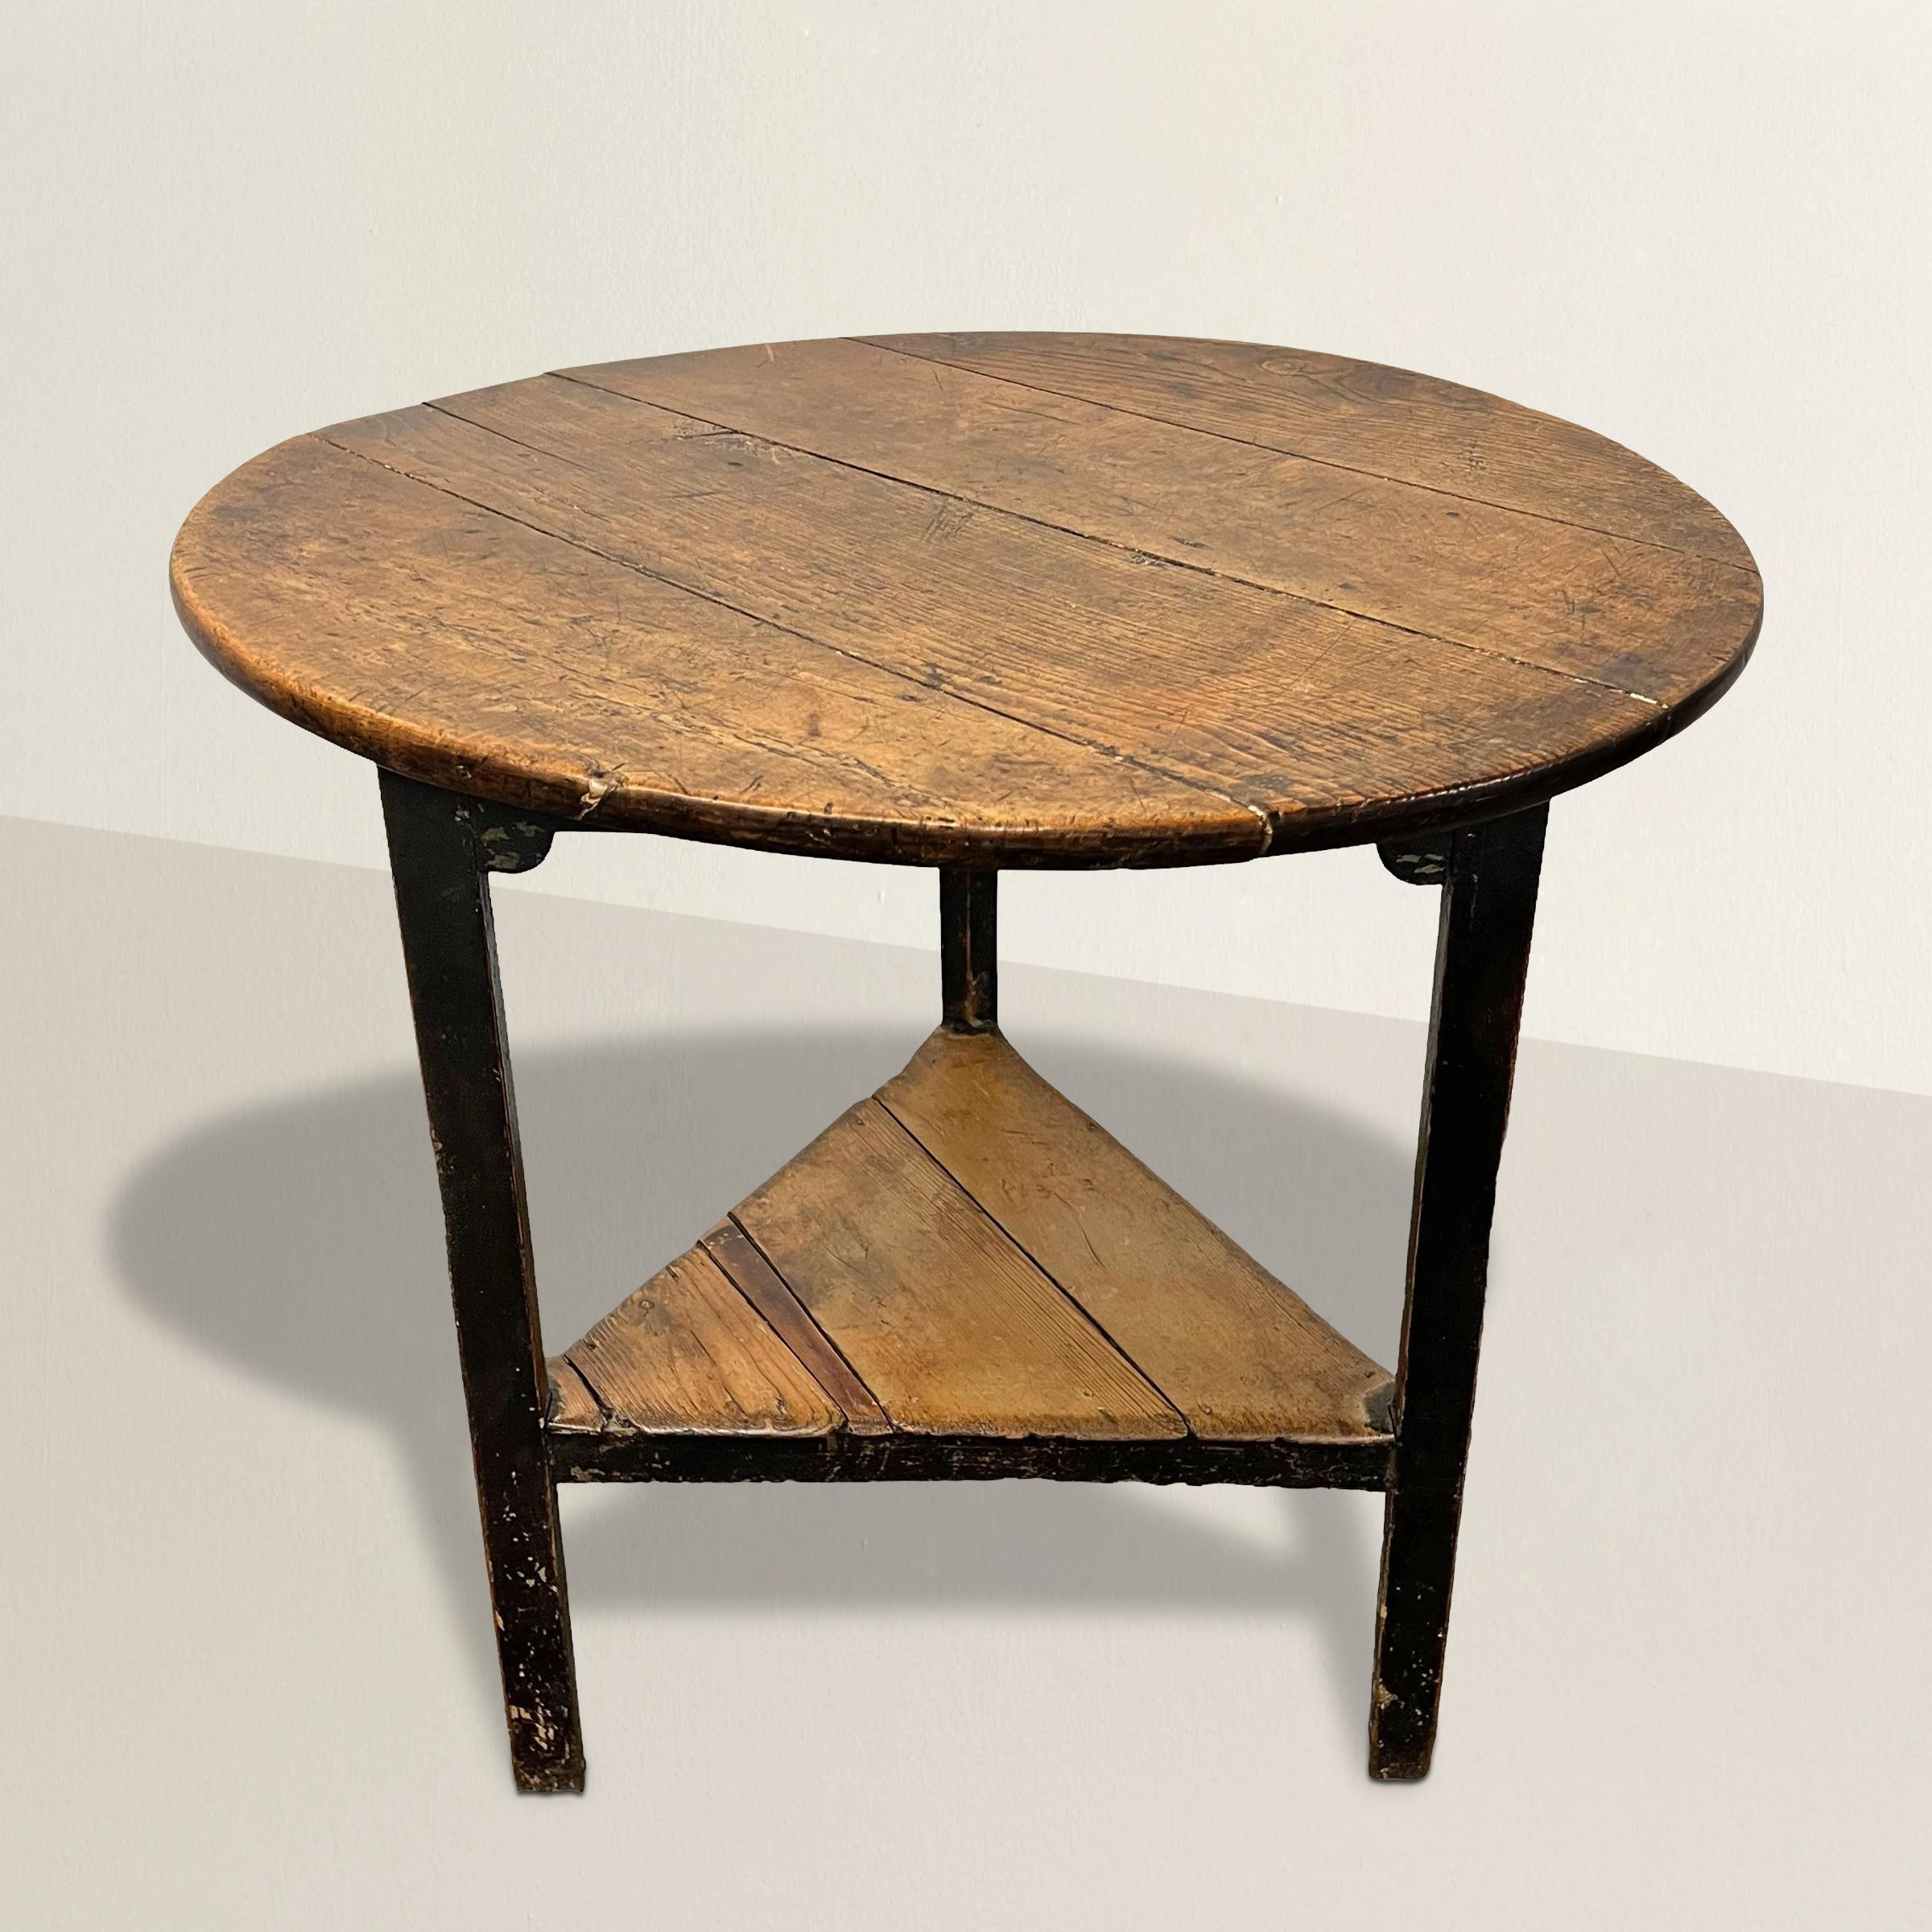 Standing as a testament to 18th-century English craftsmanship, this exceptional elmwood cricket table is a captivating piece of furniture. Its round top and shelf boasts a patina that tells the tale of years gone by. Supported by three elegantly